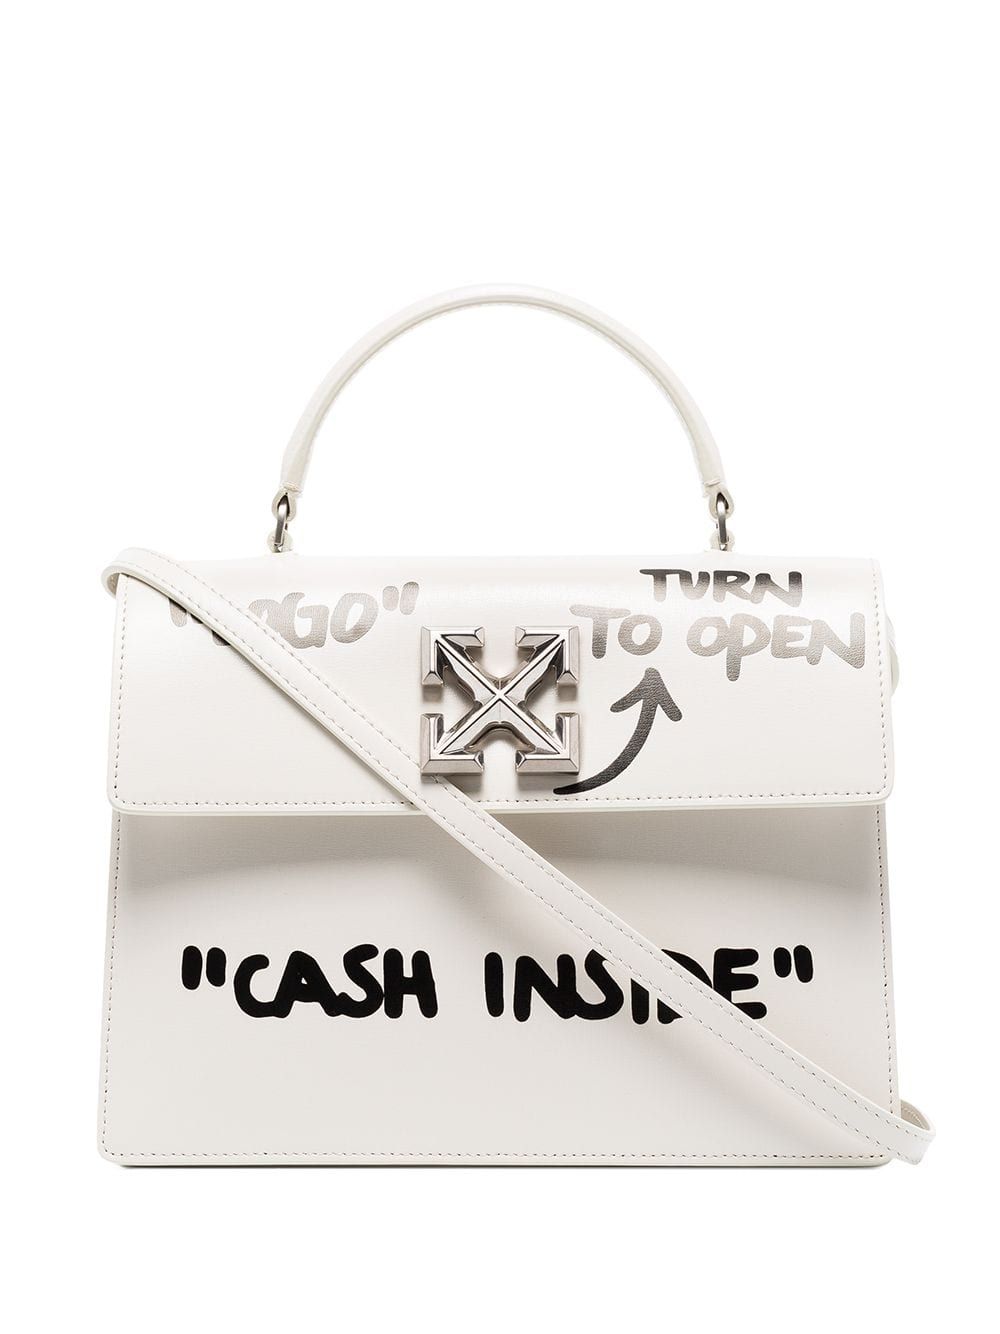 Weekdays Teasing Beaten truck Off-White's $1,300 "Cash Inside" Bag Invites People to Rob It